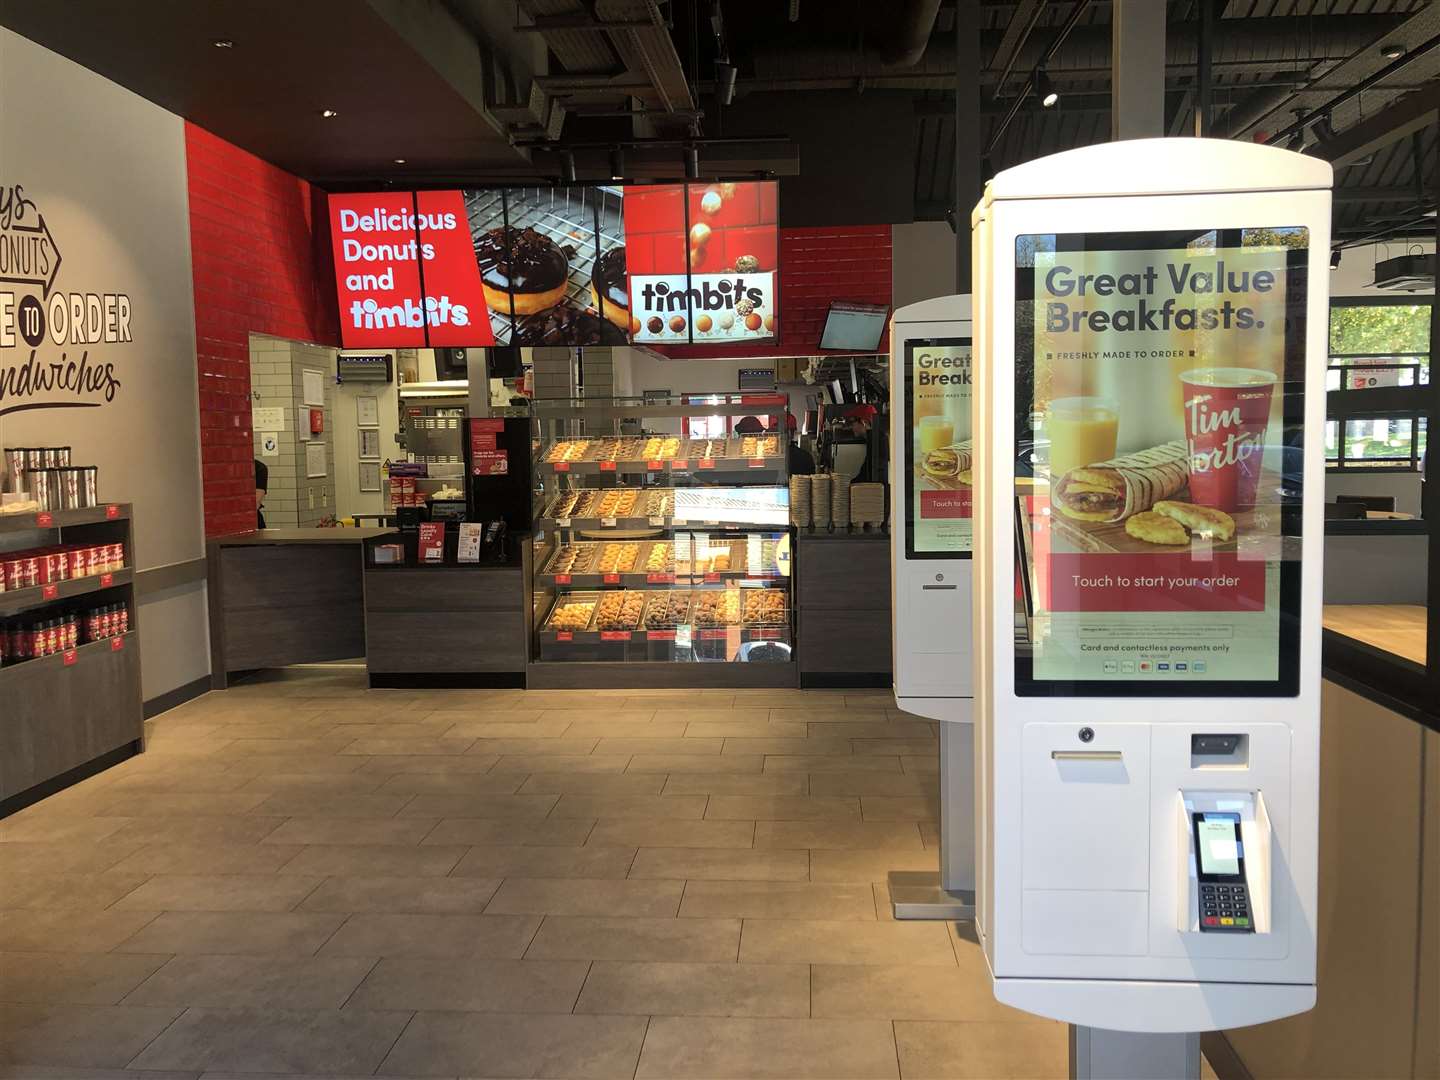 There are self-ordering machines and counter service